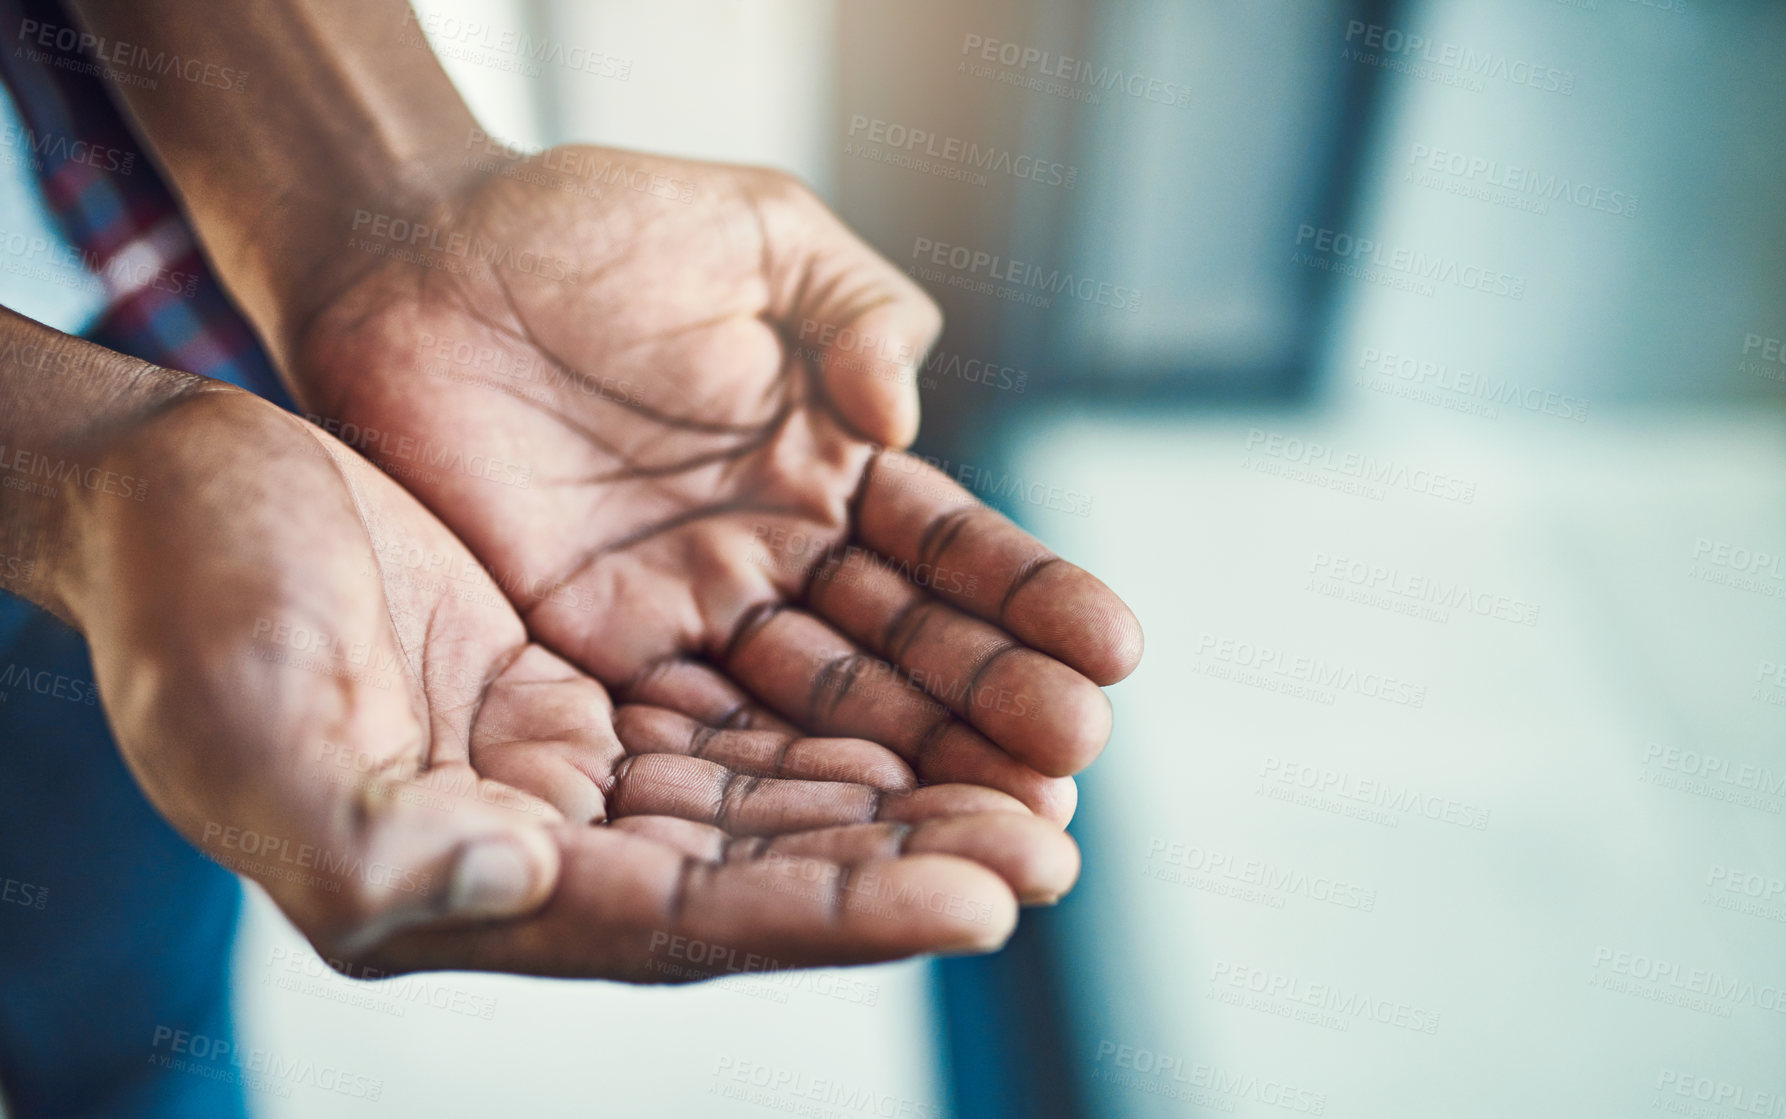 Buy stock photo Closeup shot of hands cupped together